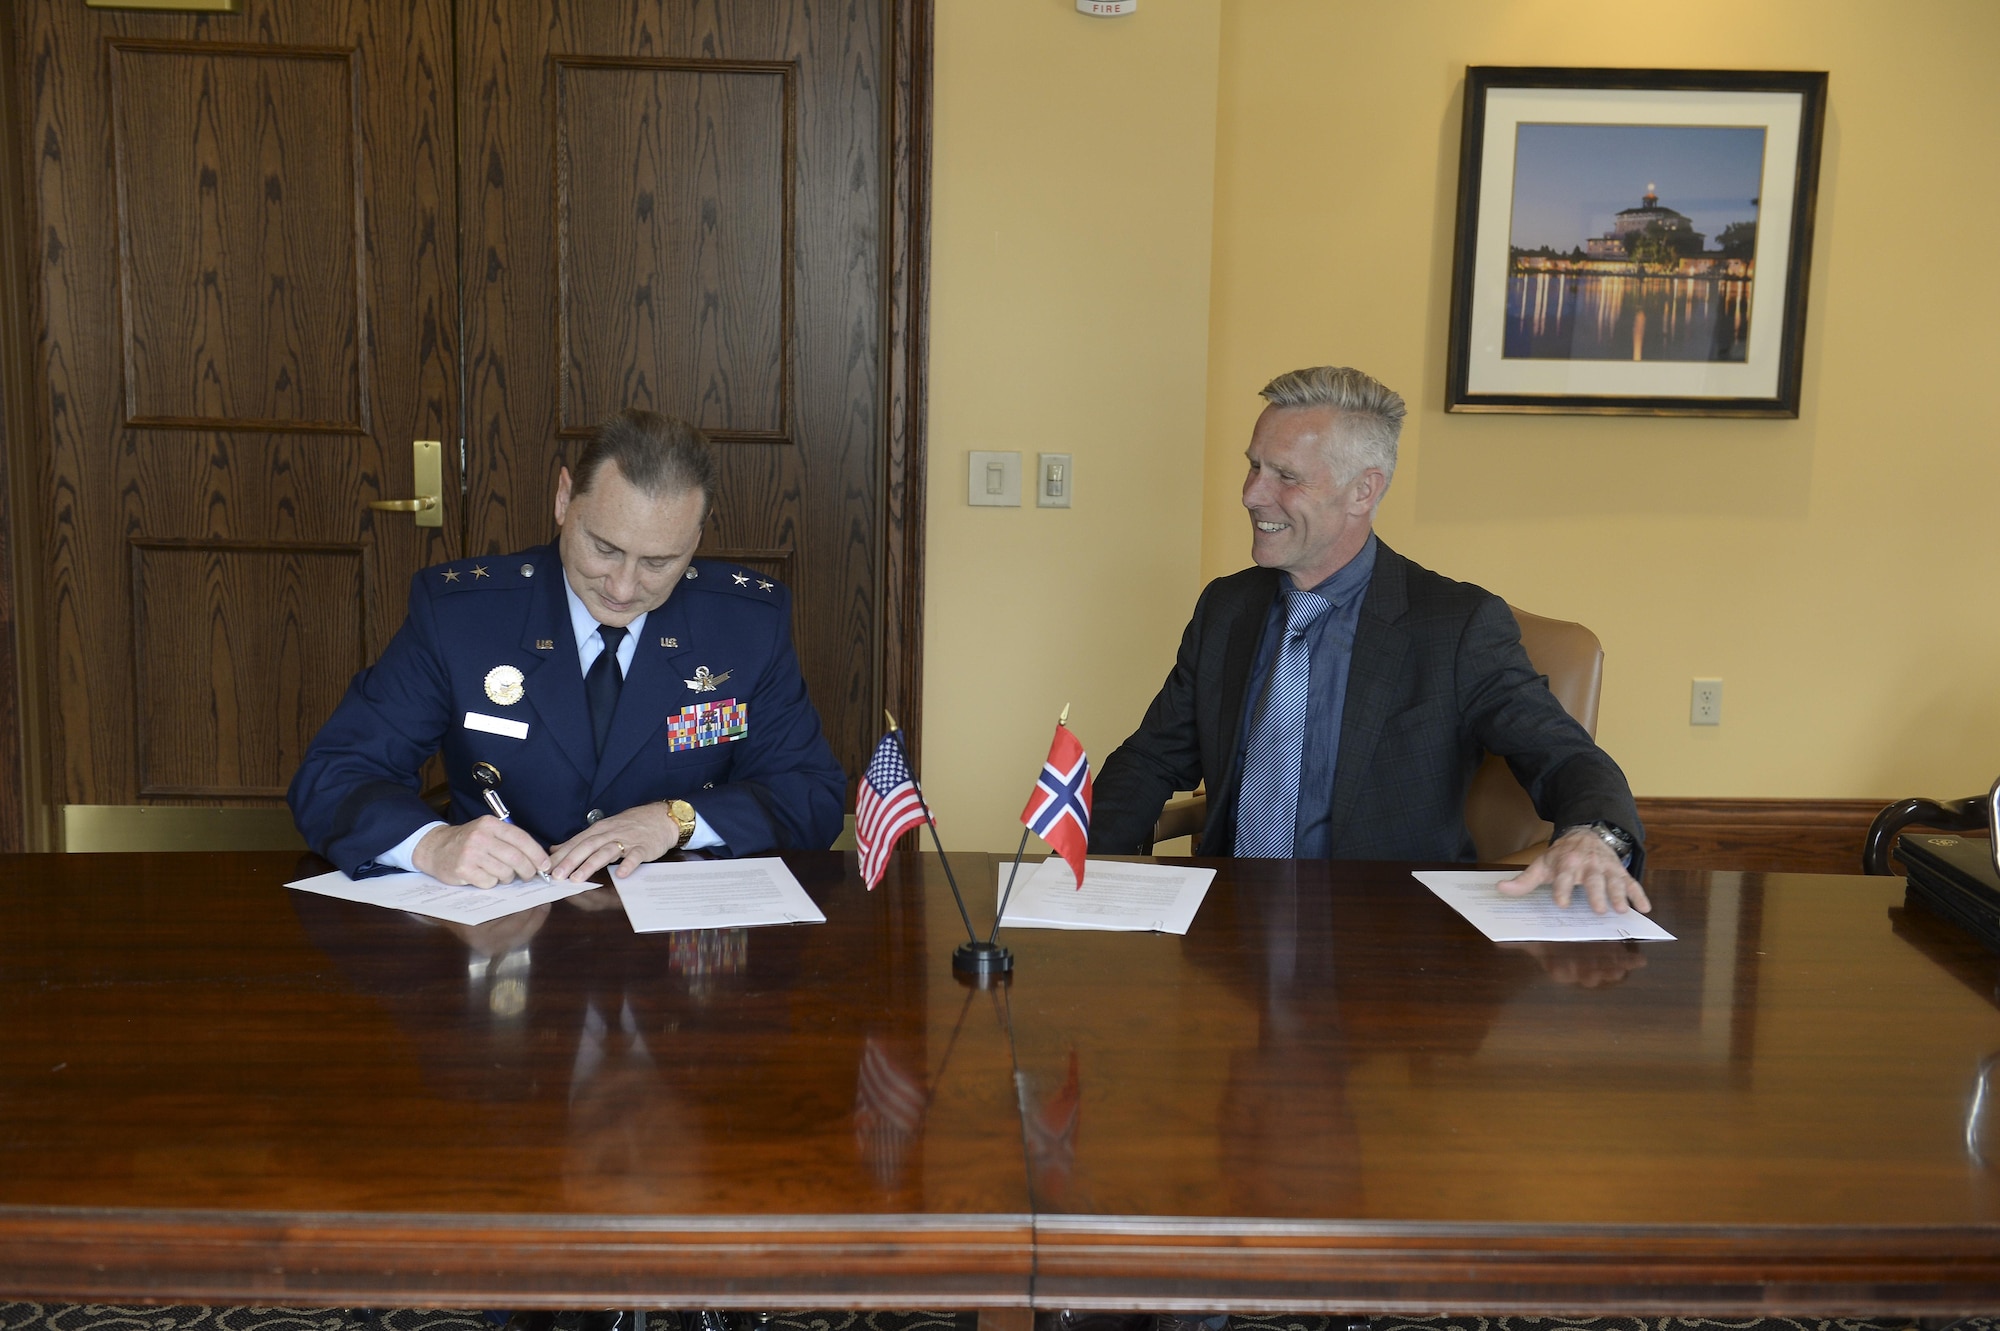 U.S. Air Force Maj. Gen. Clinton E. Crosier, the U.S. Strategic Command (USSTRATCOM) director of plans and policy, signs a memorandum of understanding with Royal Norwegian Air Force Col. Stig Nilsson, the Norwegian Ministry of Defense head of the space program, April 4, 2017, at the 33rd Annual Space Symposium, Colorado Springs, Colorado. The memorandum authorizes sharing space situational awareness (SSA) services and information with the Norwegian Ministry of Defense and Norwegian Ministry of Trade, Industry and Fisheries. (U.S. Air Force photo/ David Grim)